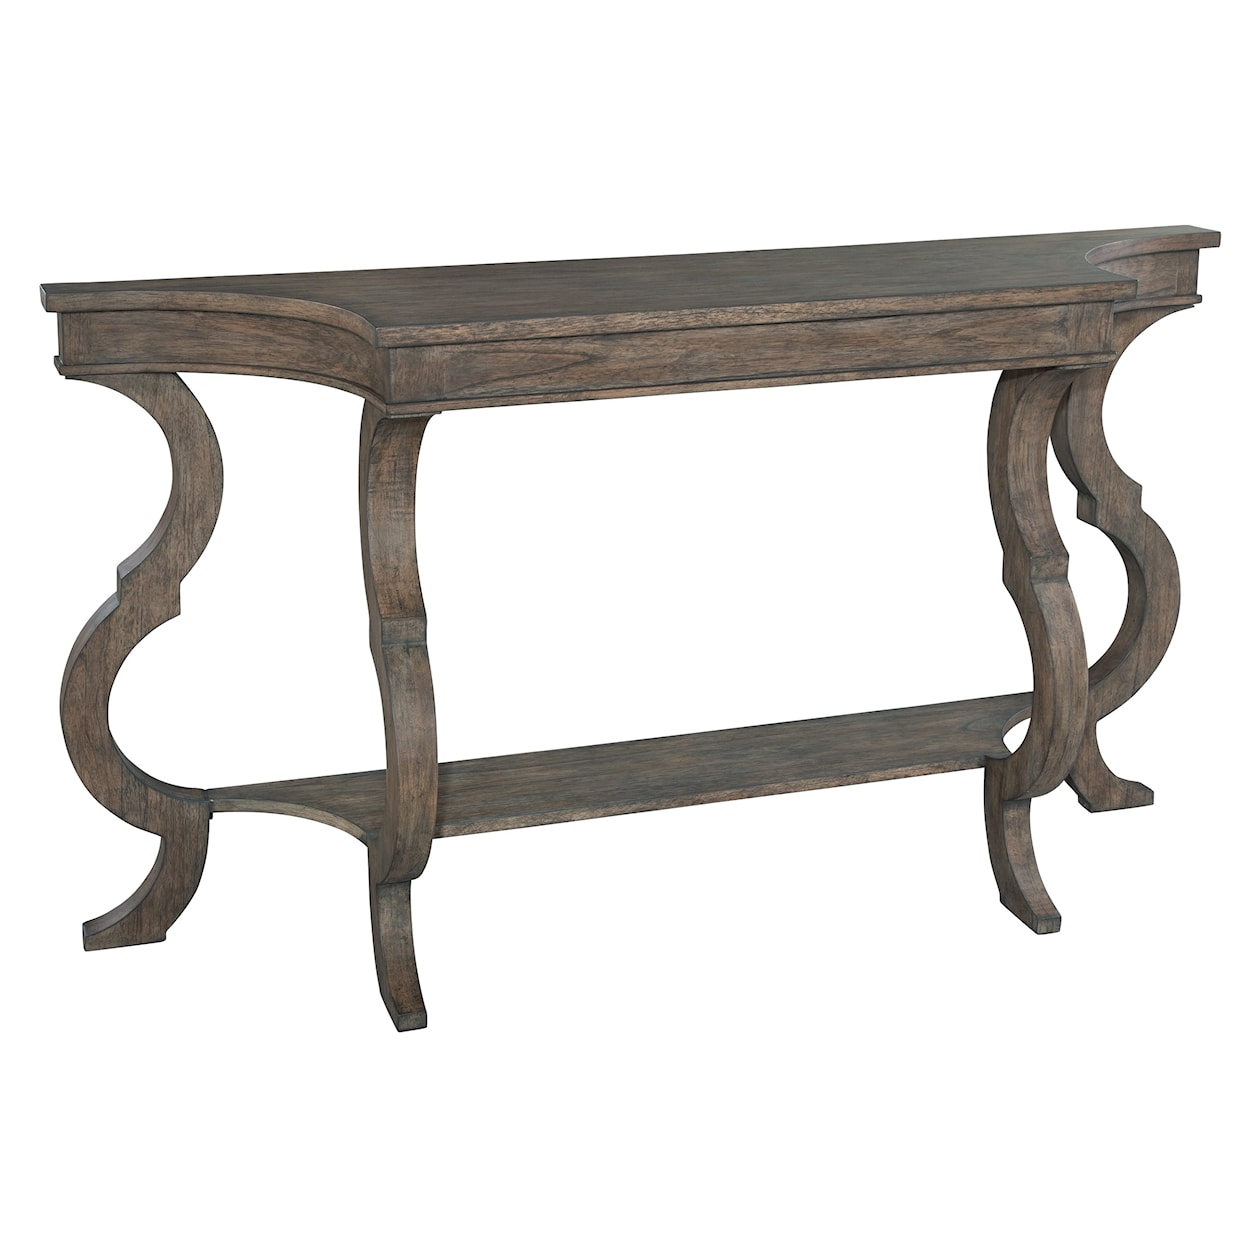 Hekman Lincoln Park Sofa Table With Shaped Legs